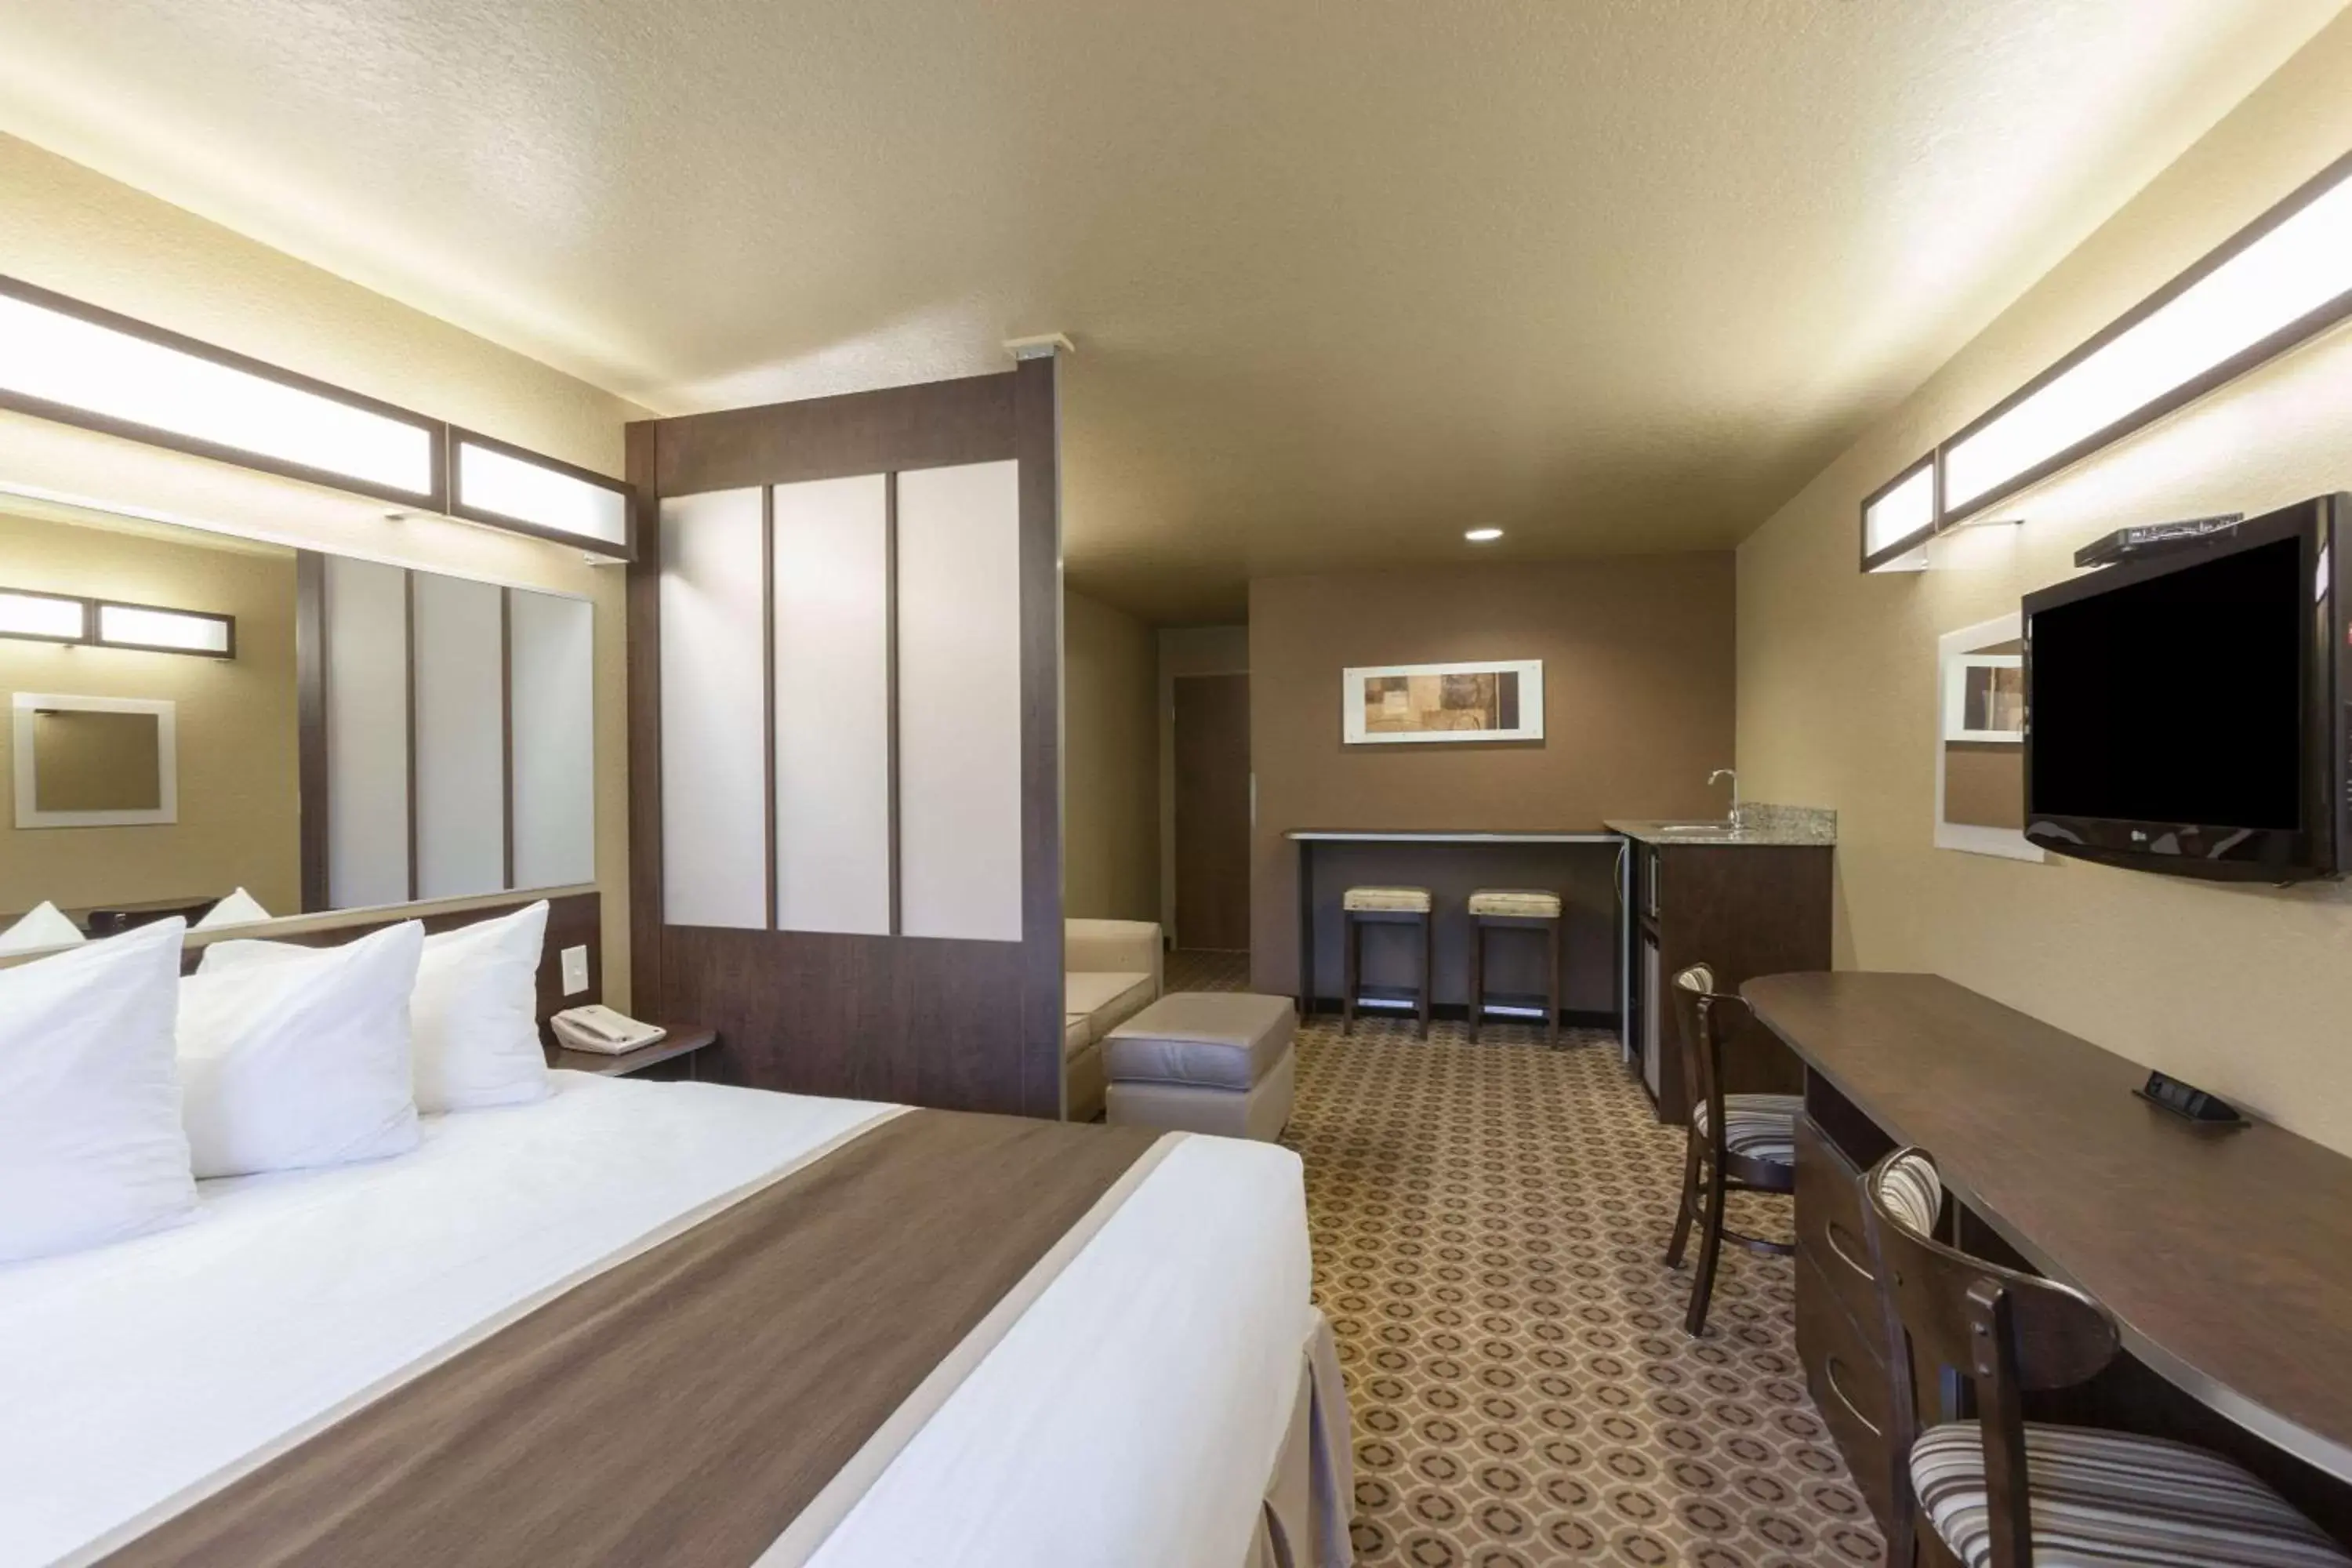 Photo of the whole room in Microtel Inn & Suites by Wyndham Searcy